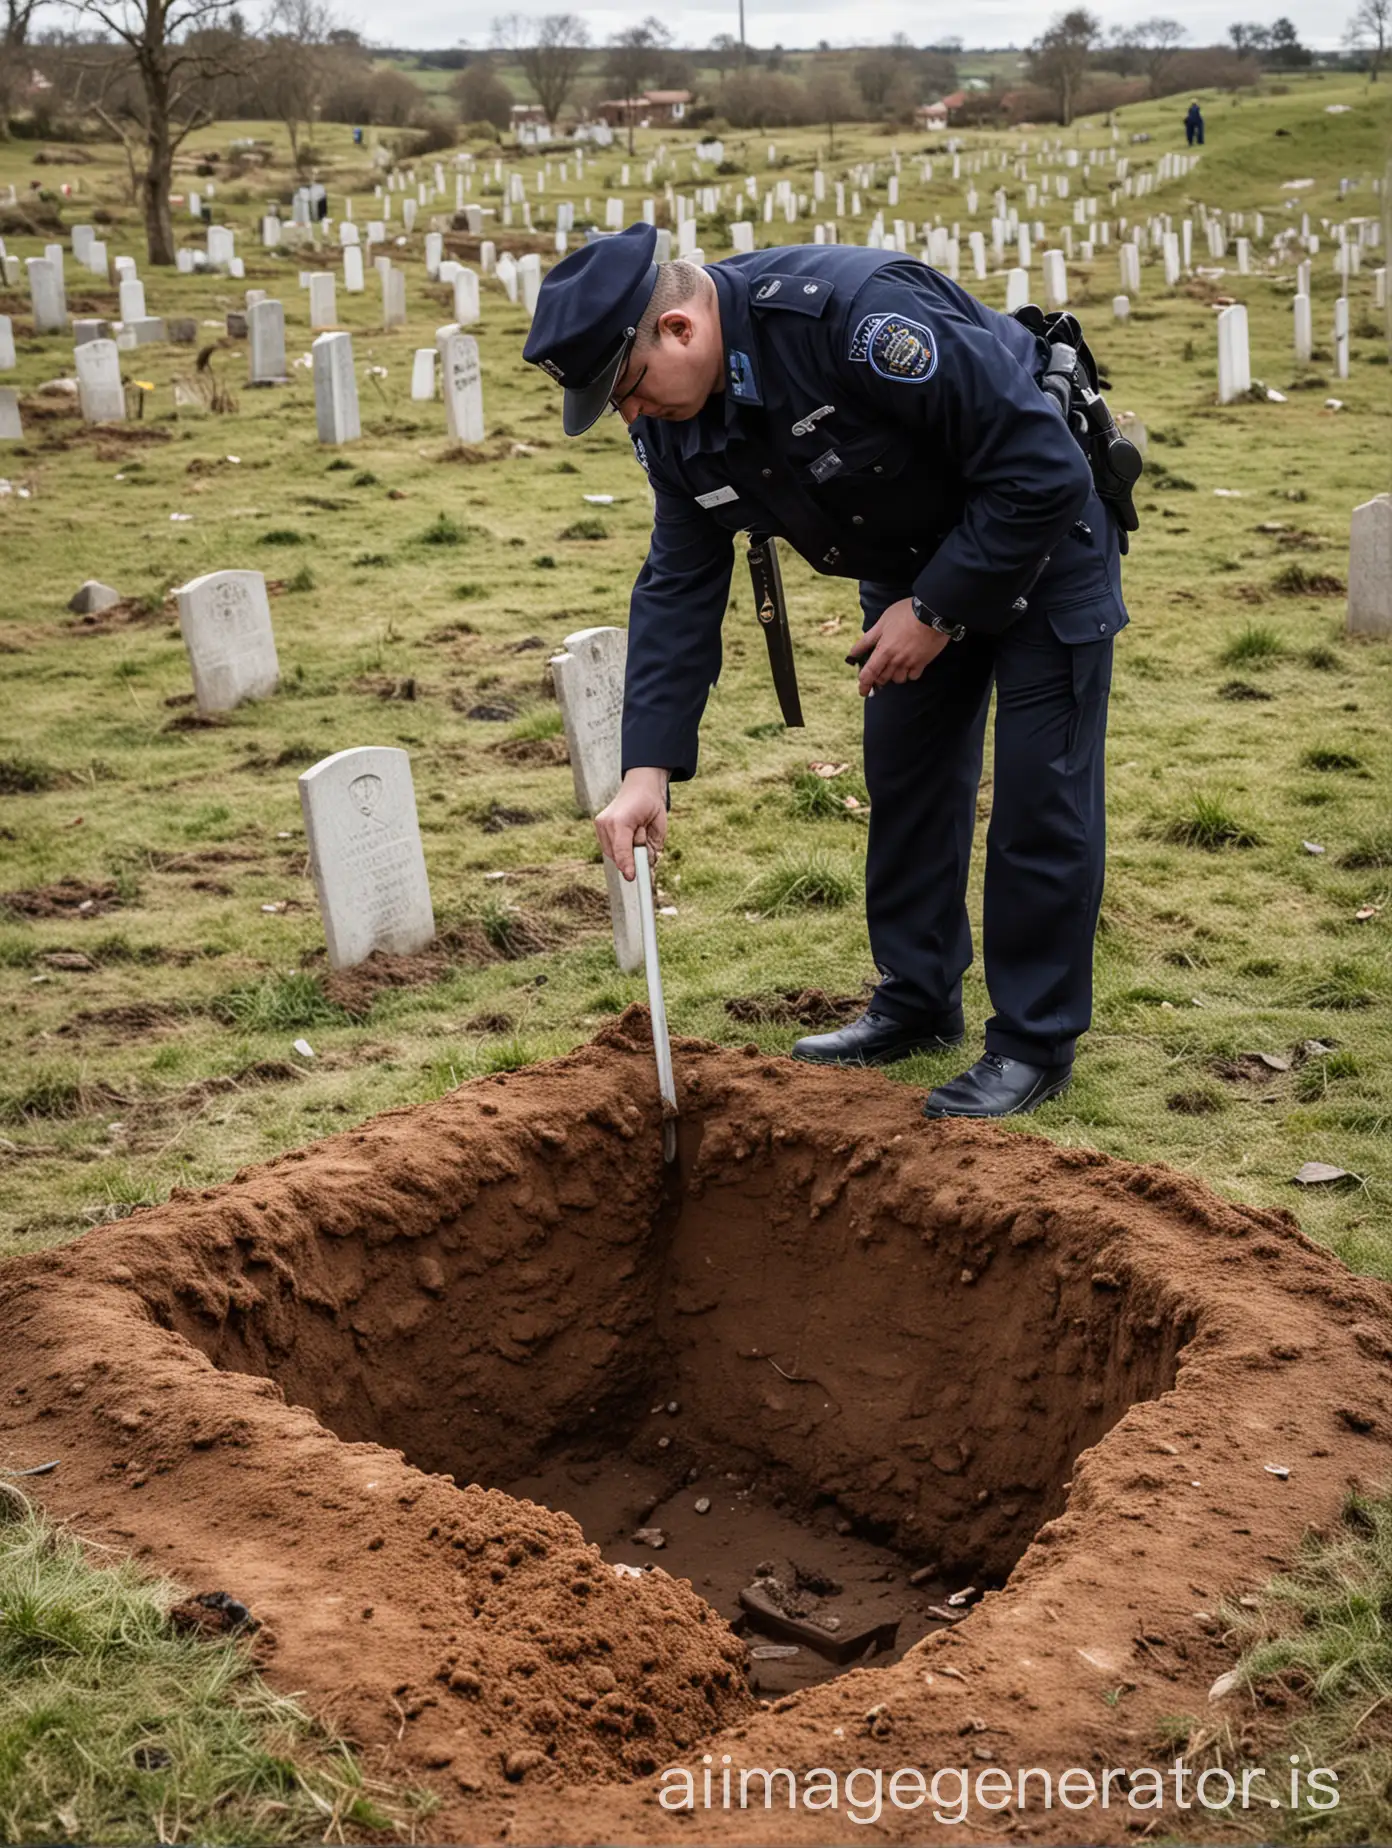 a police officer looking at a digged grave
where the grave is empty

